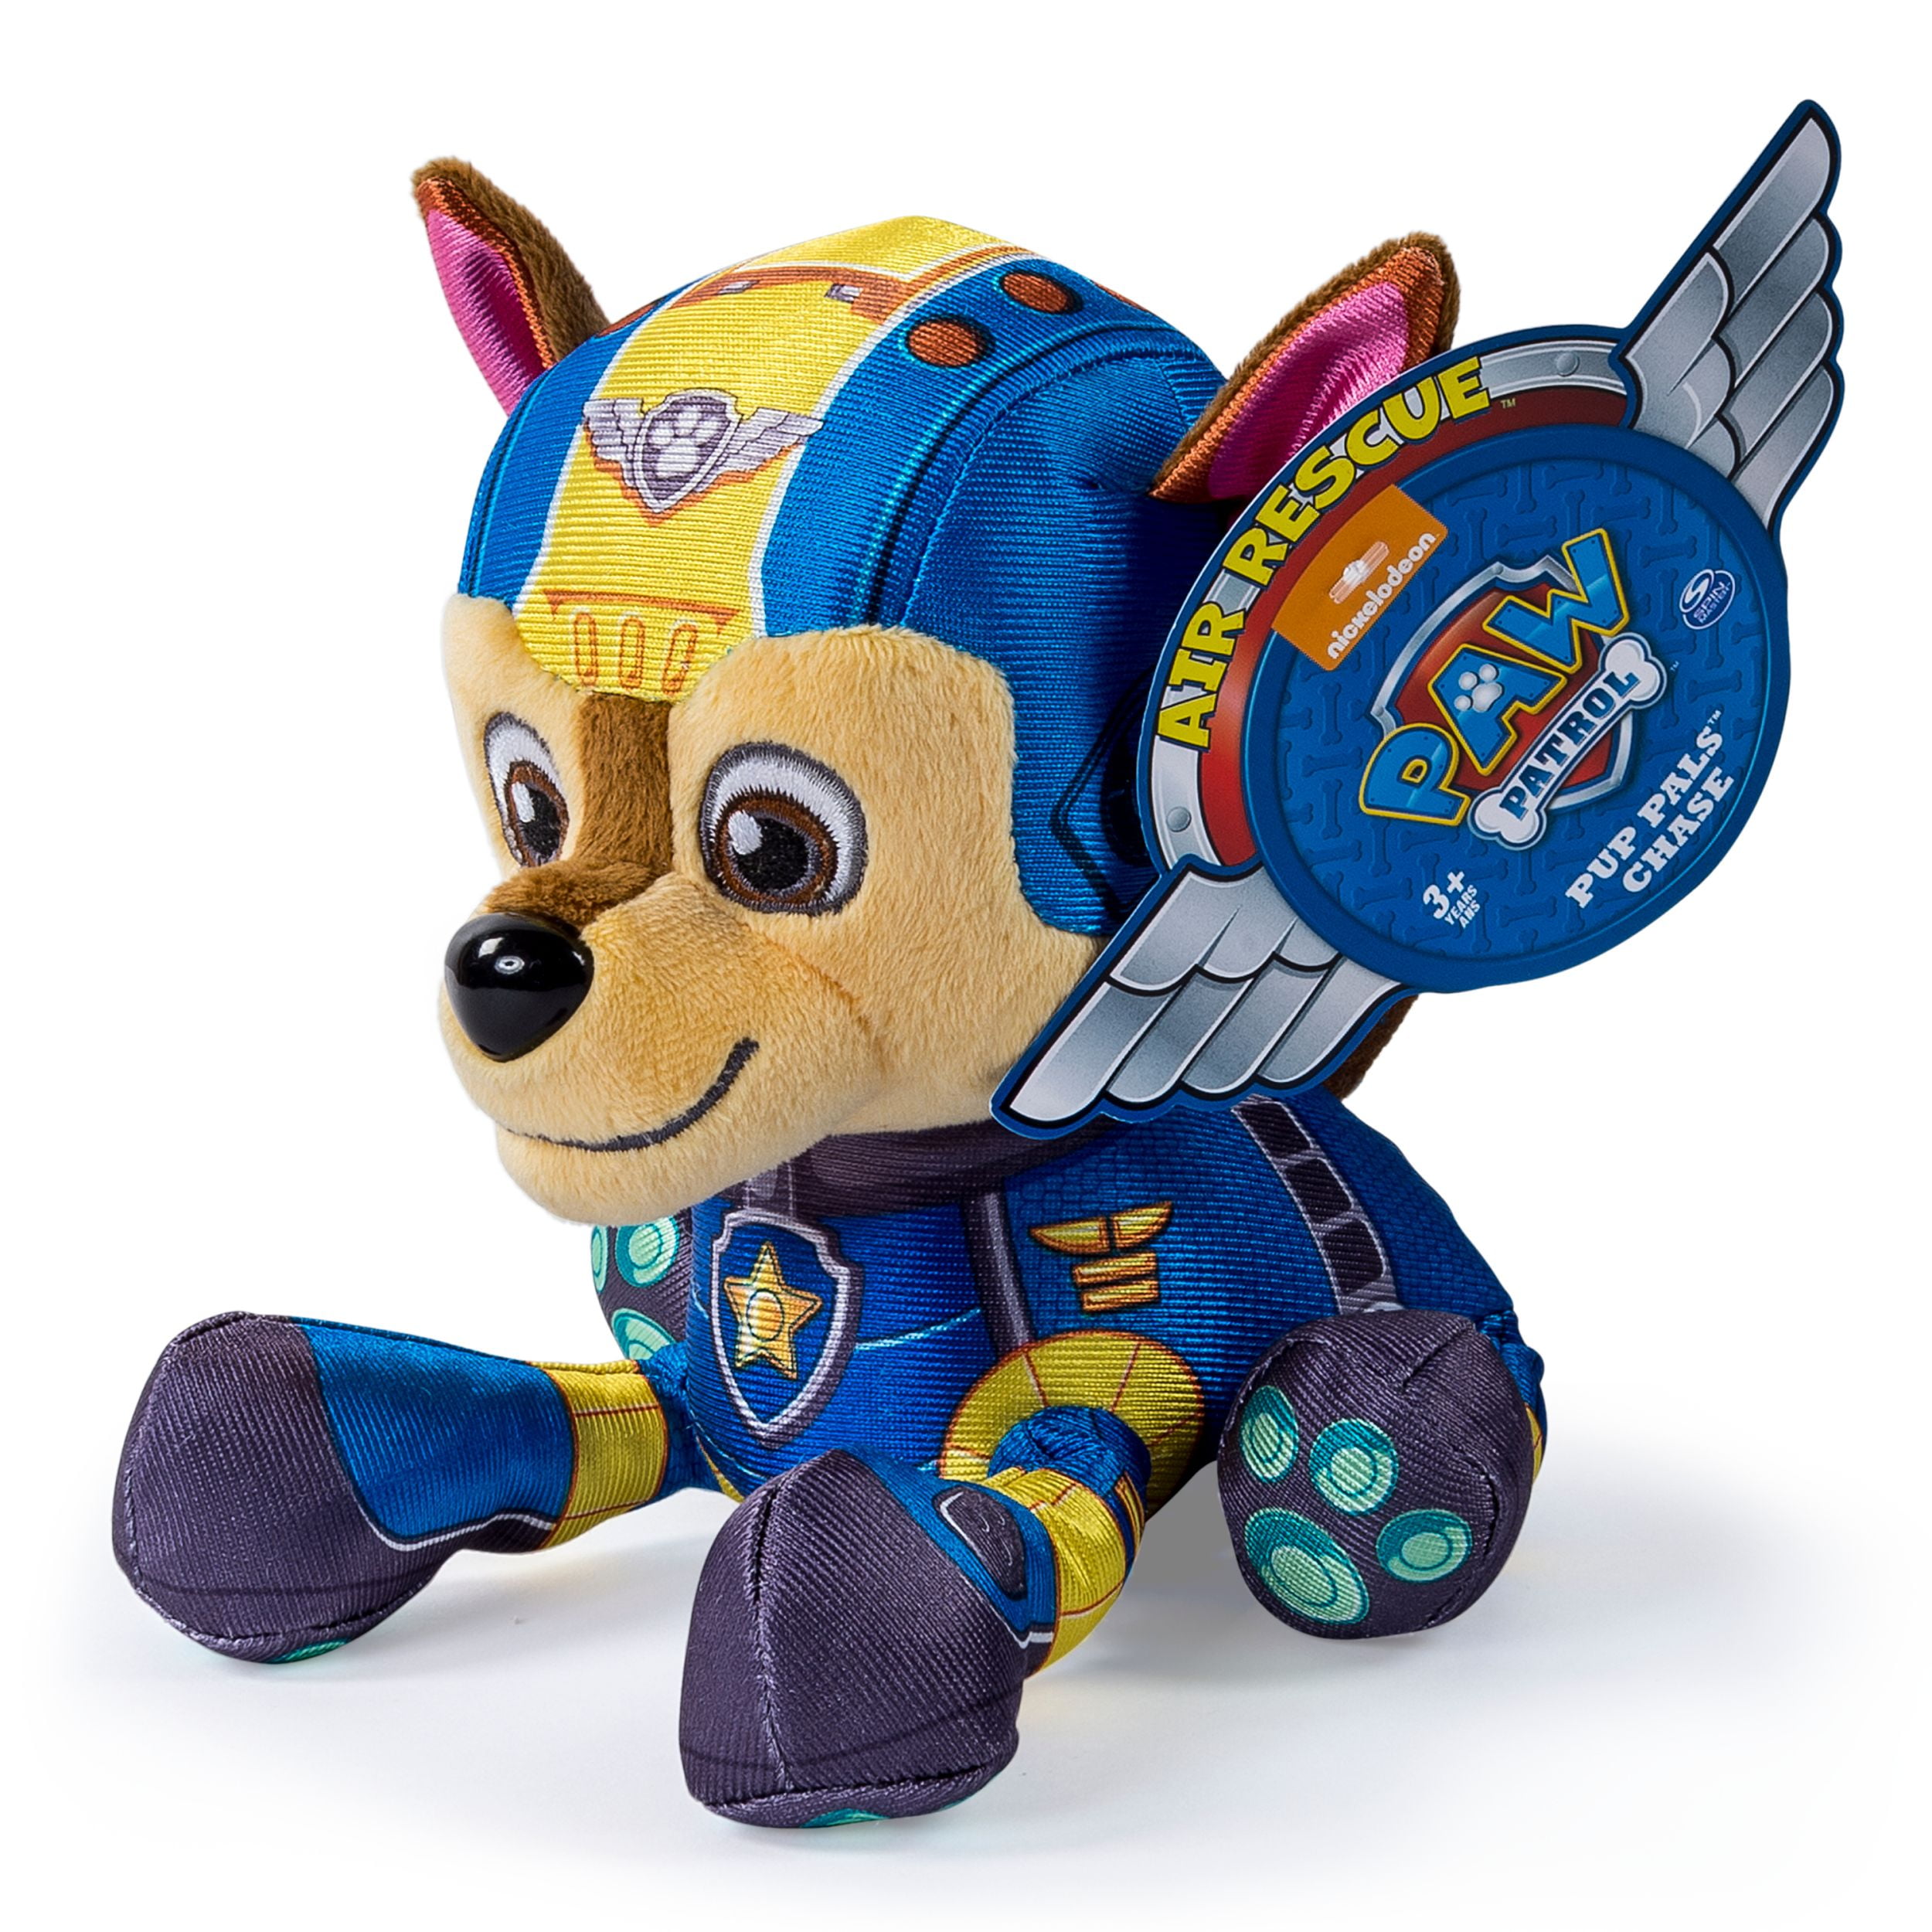 paw patrol air rescue chase